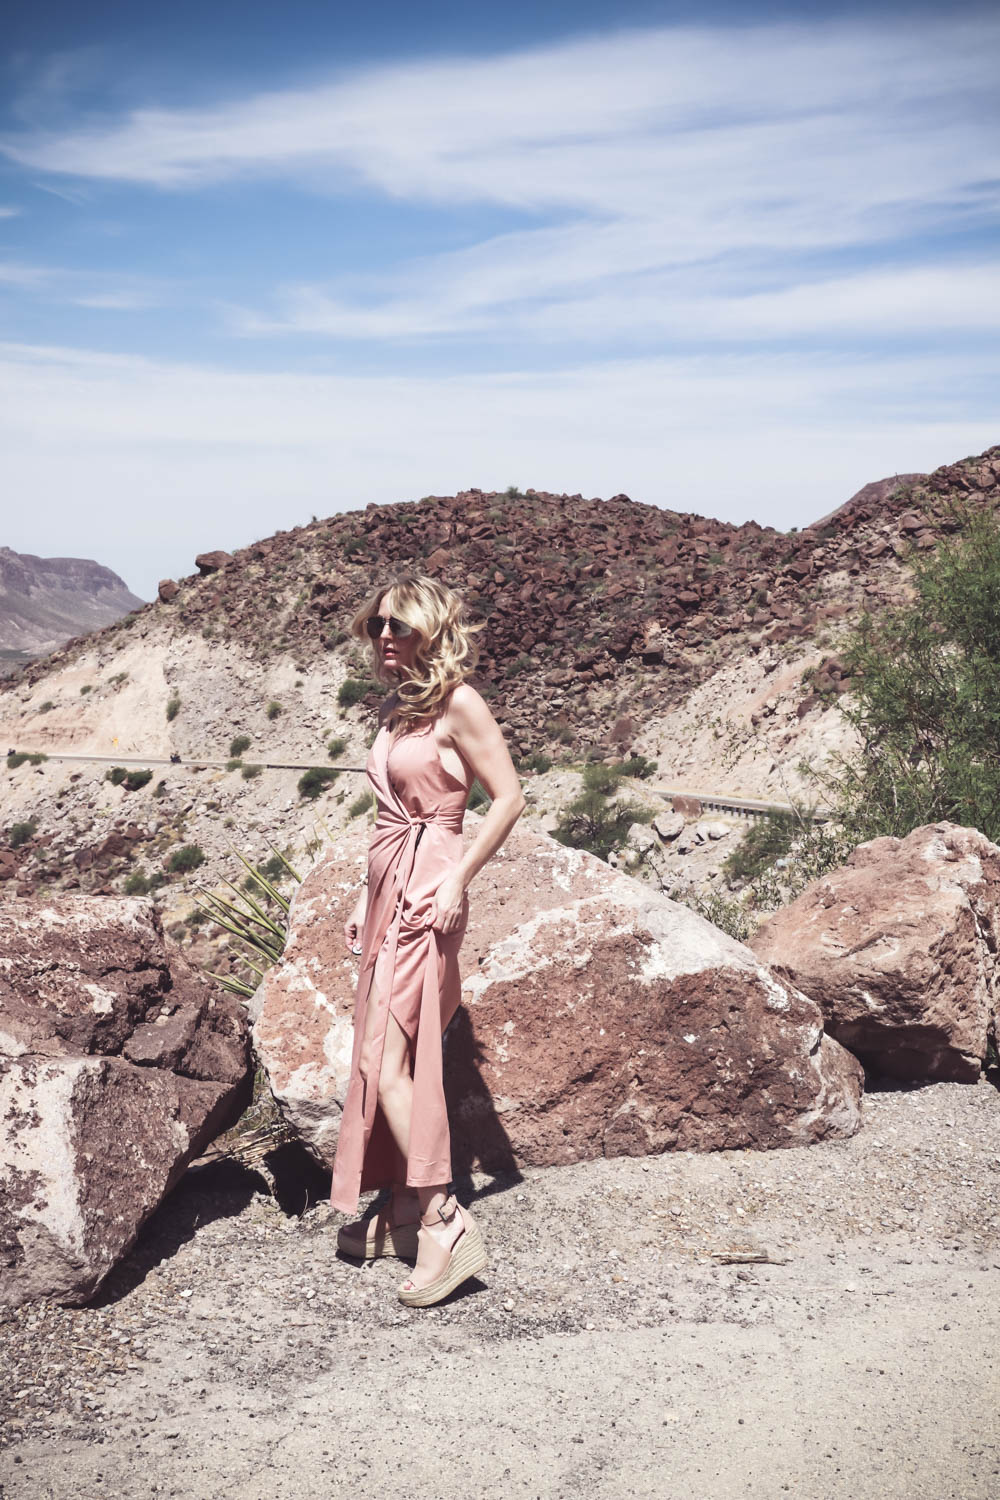 Wrap Dress by Wyldr from Asos and Revolve in blush nude color with Marc Fisher perforated ankle strap espadrilles wedges, on fashion blogger and fashion youtuber erin busbee of busbestyle, san antonio, texas, shot near Big Bend National Park in West Texas along the Rio Grande, women's dress ideas